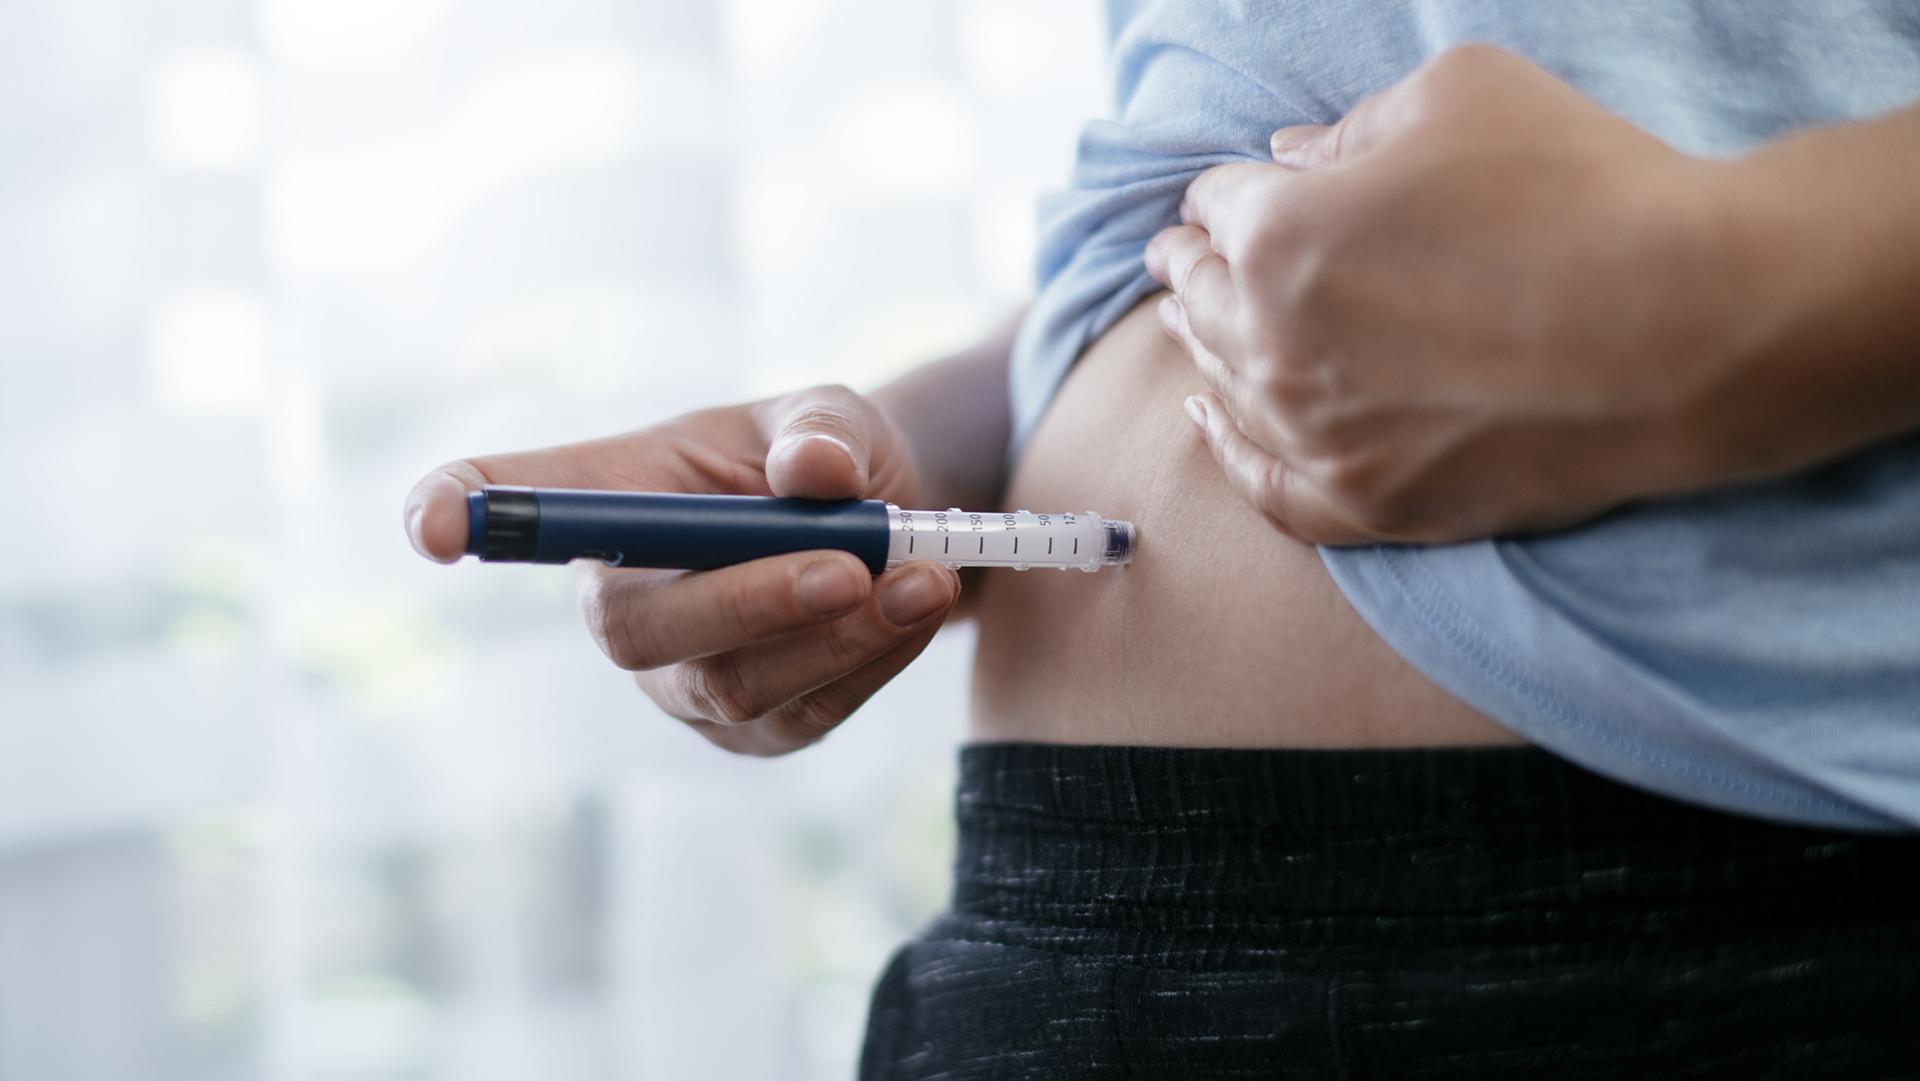 Woman is making insulin injection in the stomach. Stock photo  Shadow DOF. Developed from RAW; retouched with special care and attention; Small amount of grain added for best final impression. 16 bit Adobe RGB color profile.